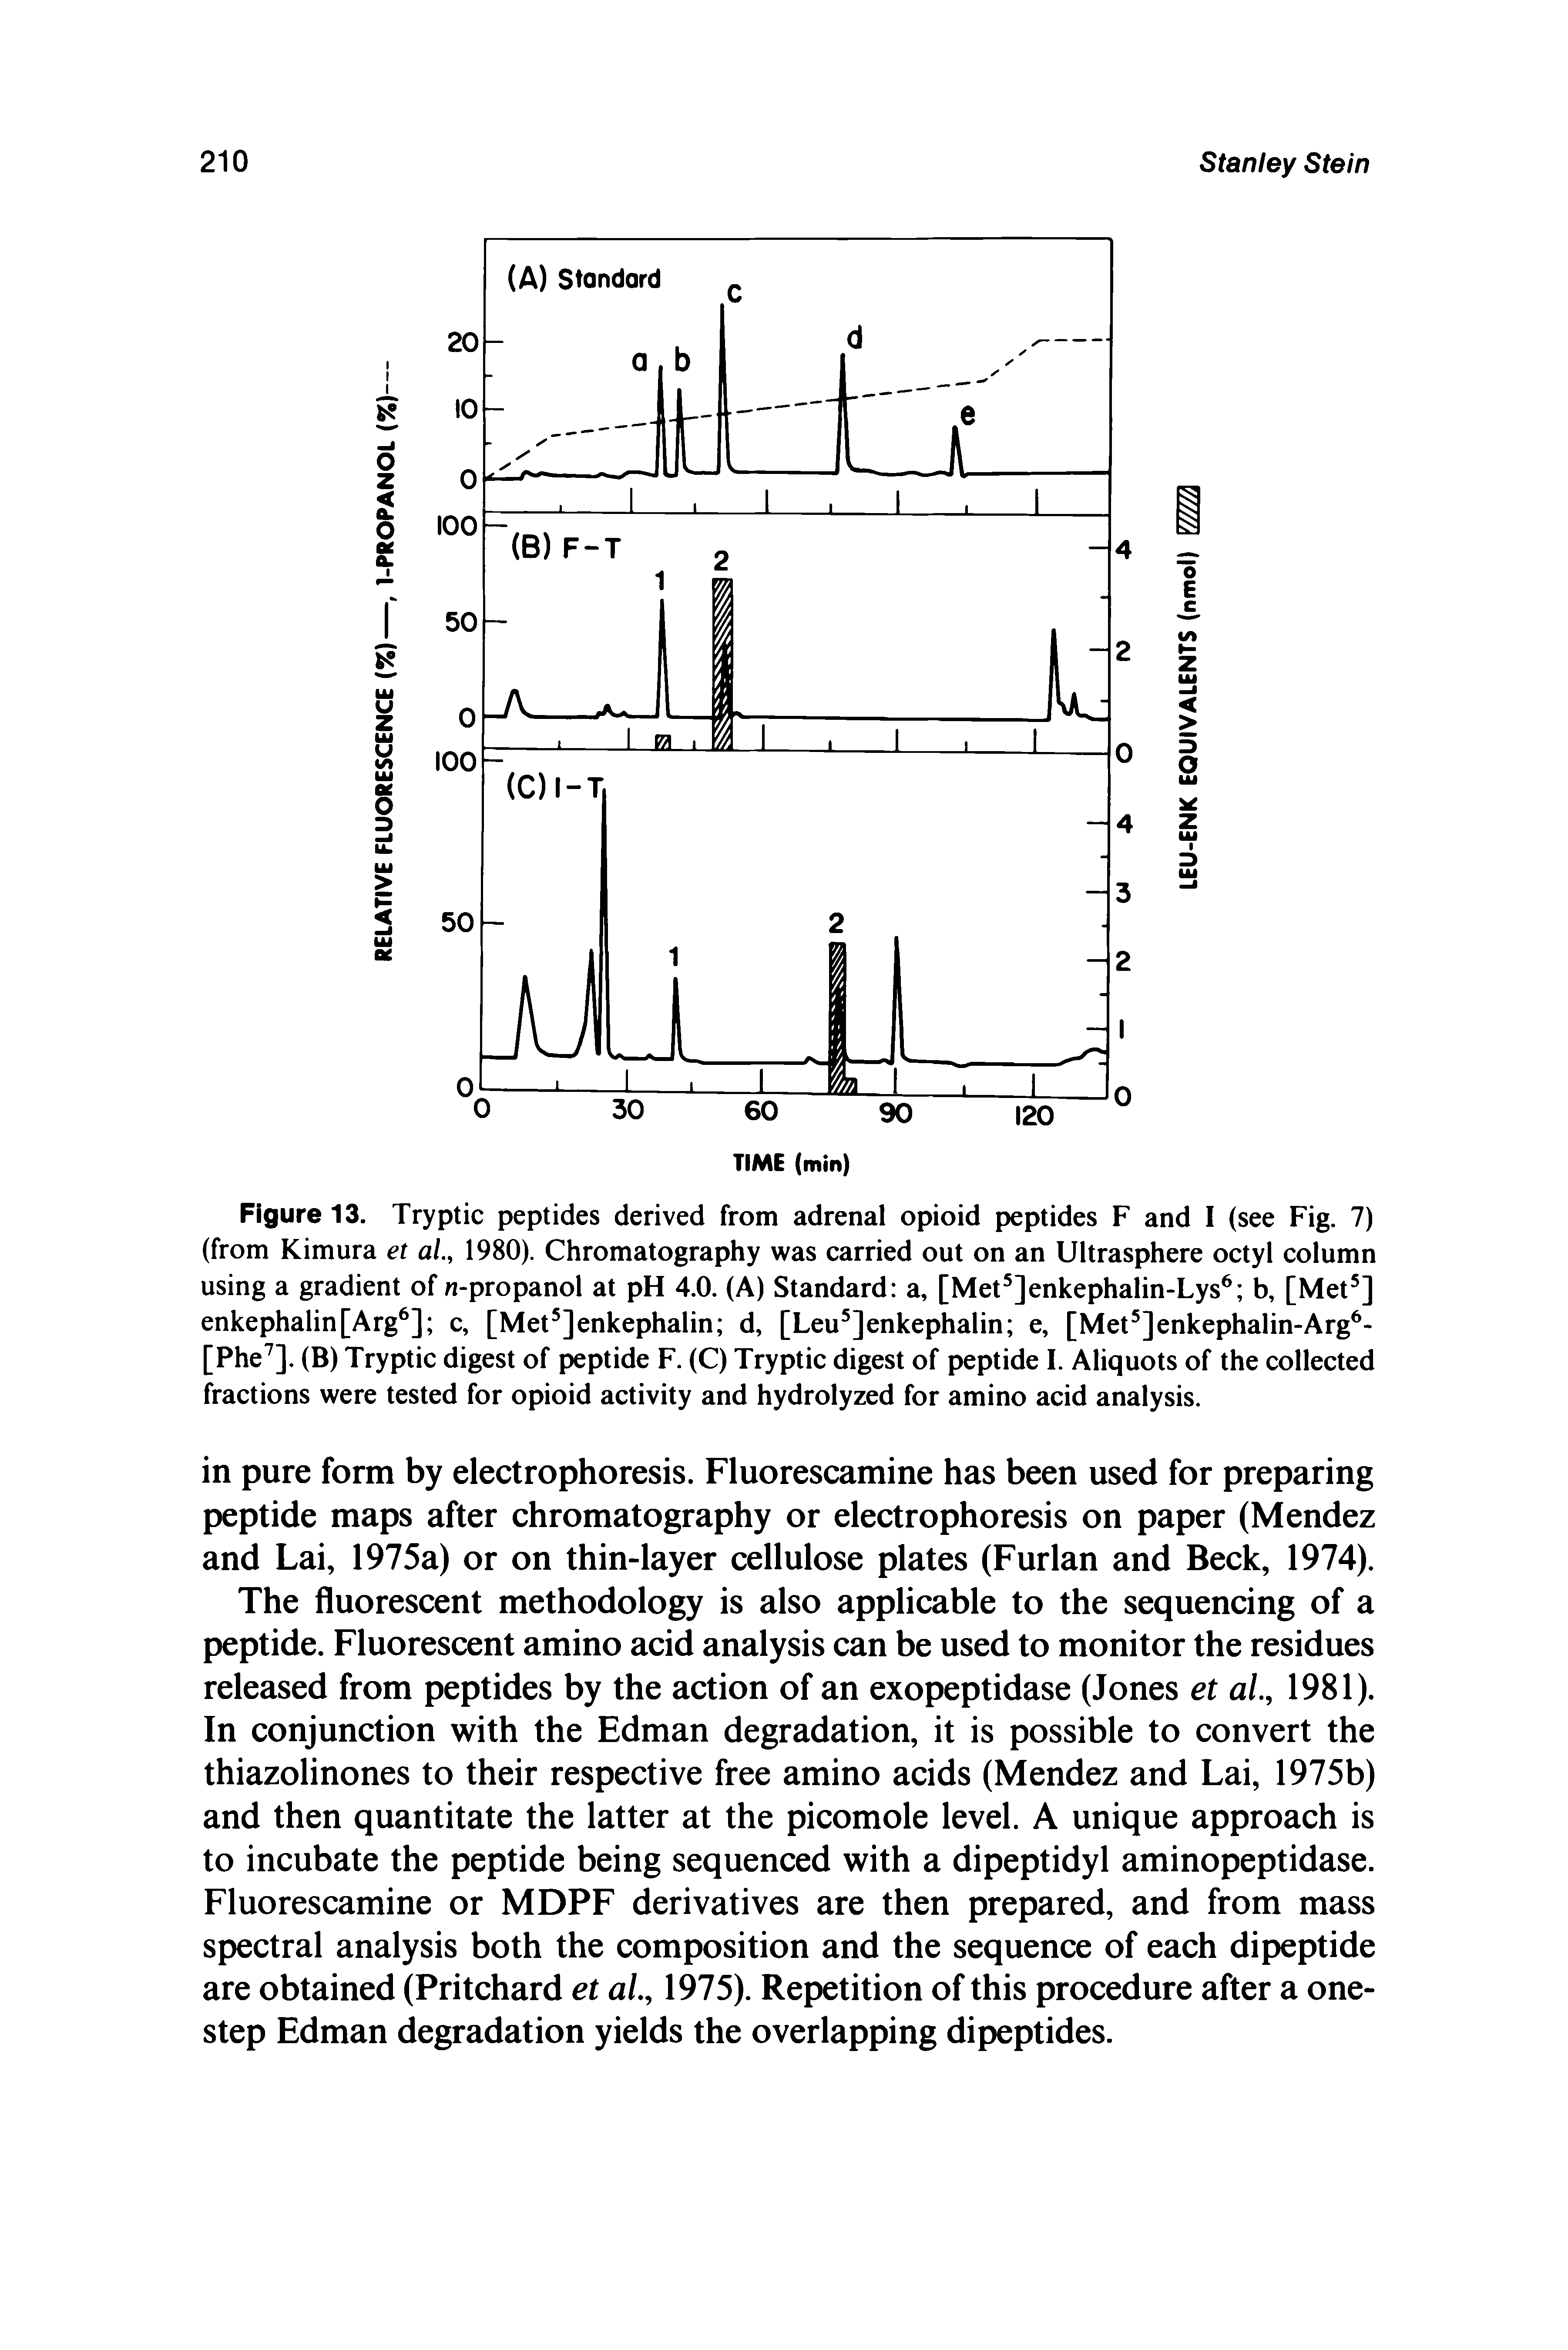 Figure 13. Tryptic peptides derived from adrenal opioid peptides F and I (see Fig. 7) (from Kimura et a/., 1980). Chromatography was carried out on an Ultrasphere octyl column using a gradient of n-propanol at pH 4.0. (A) Standard a, [Met ]enkephalin-Lys b, [Met ] enkephalin[Arg ] c, [Met ]enkephalin d, [Leu ]enkephalin e, [Met ]enkephalin-Arg -[Phe ]. (B) Tryptic digest of peptide F. (C) Tryptic digest of peptide I. Aliquots of the collected fractions were tested for opioid activity and hydrolyzed for amino acid analysis.